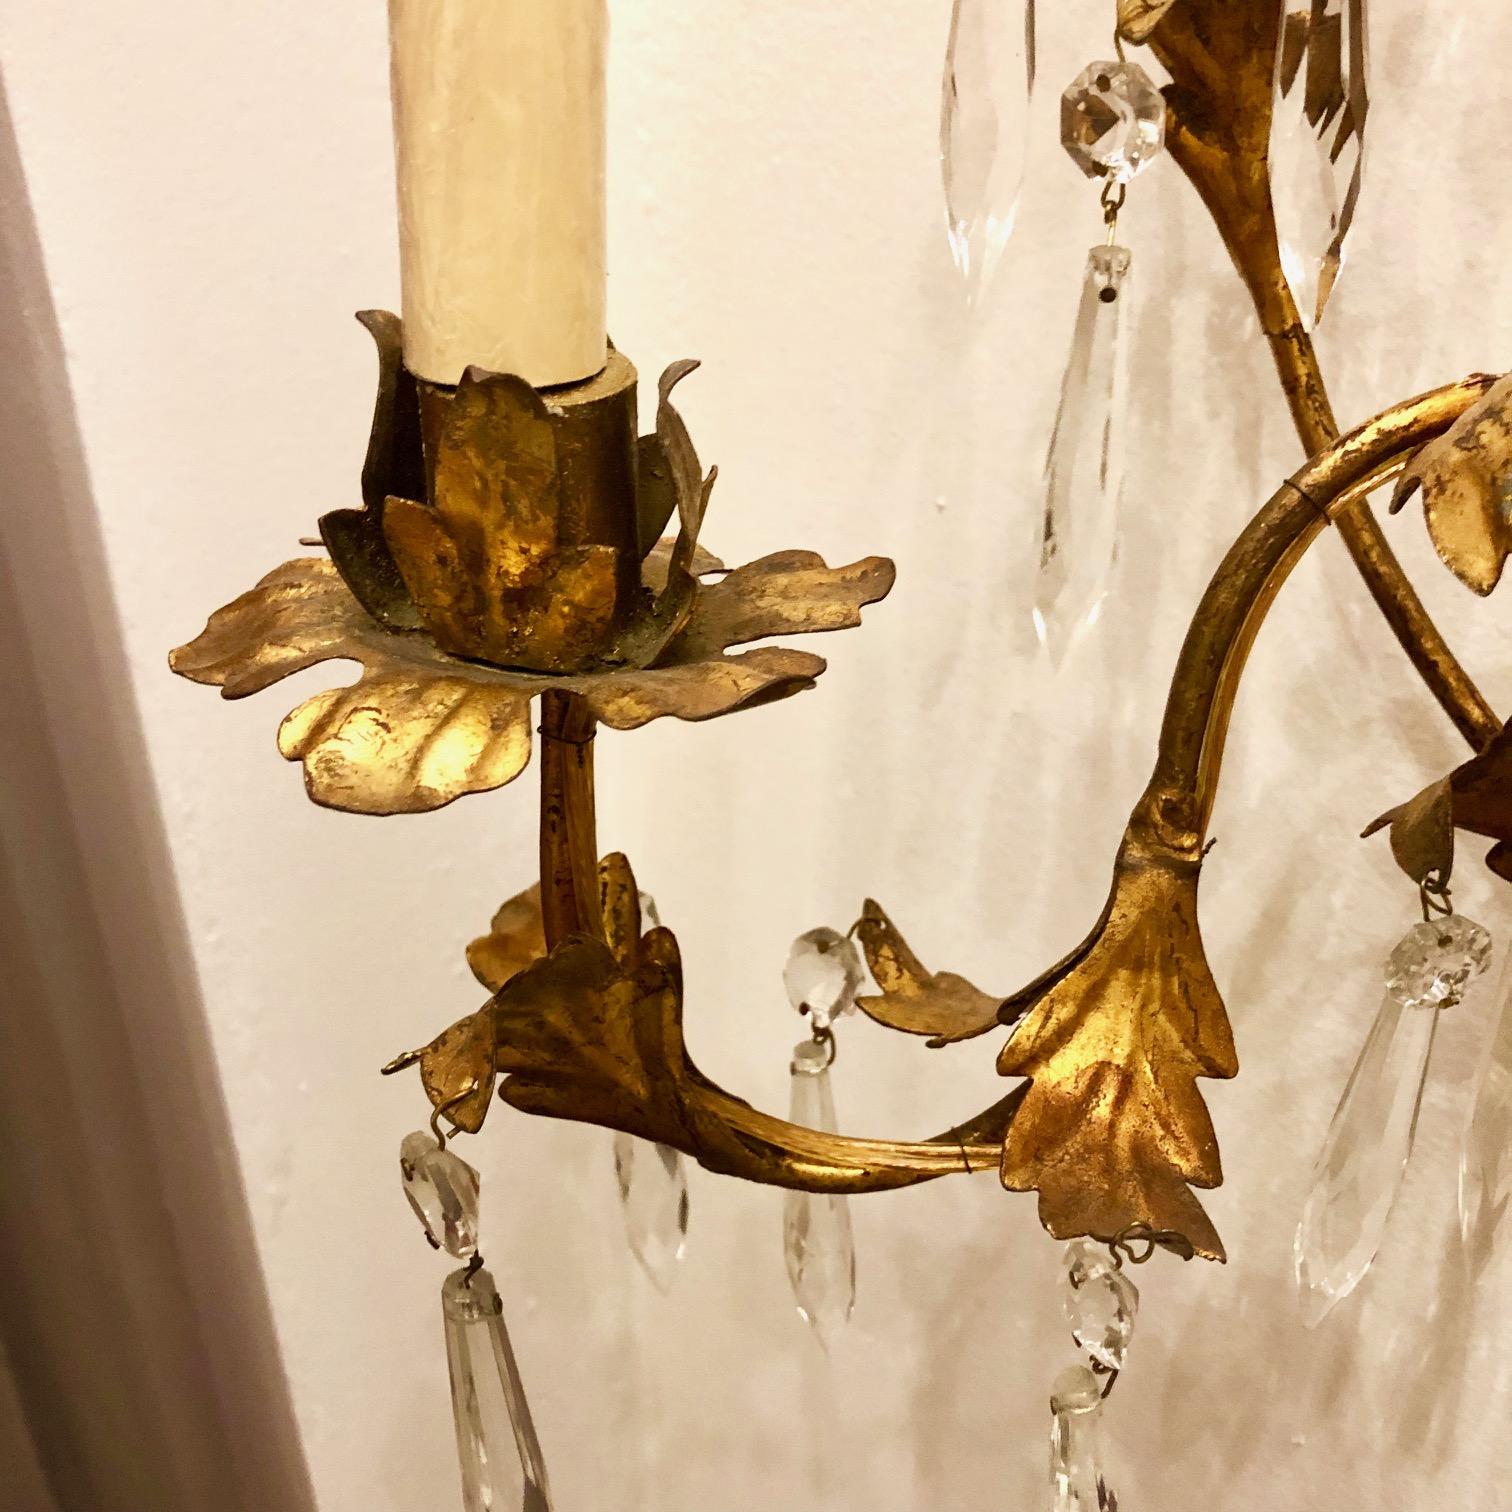 Pair of circa 1930s Italian foliage motif gilt metal sconces with crystal hangings.

Measurements:
Height 18.5